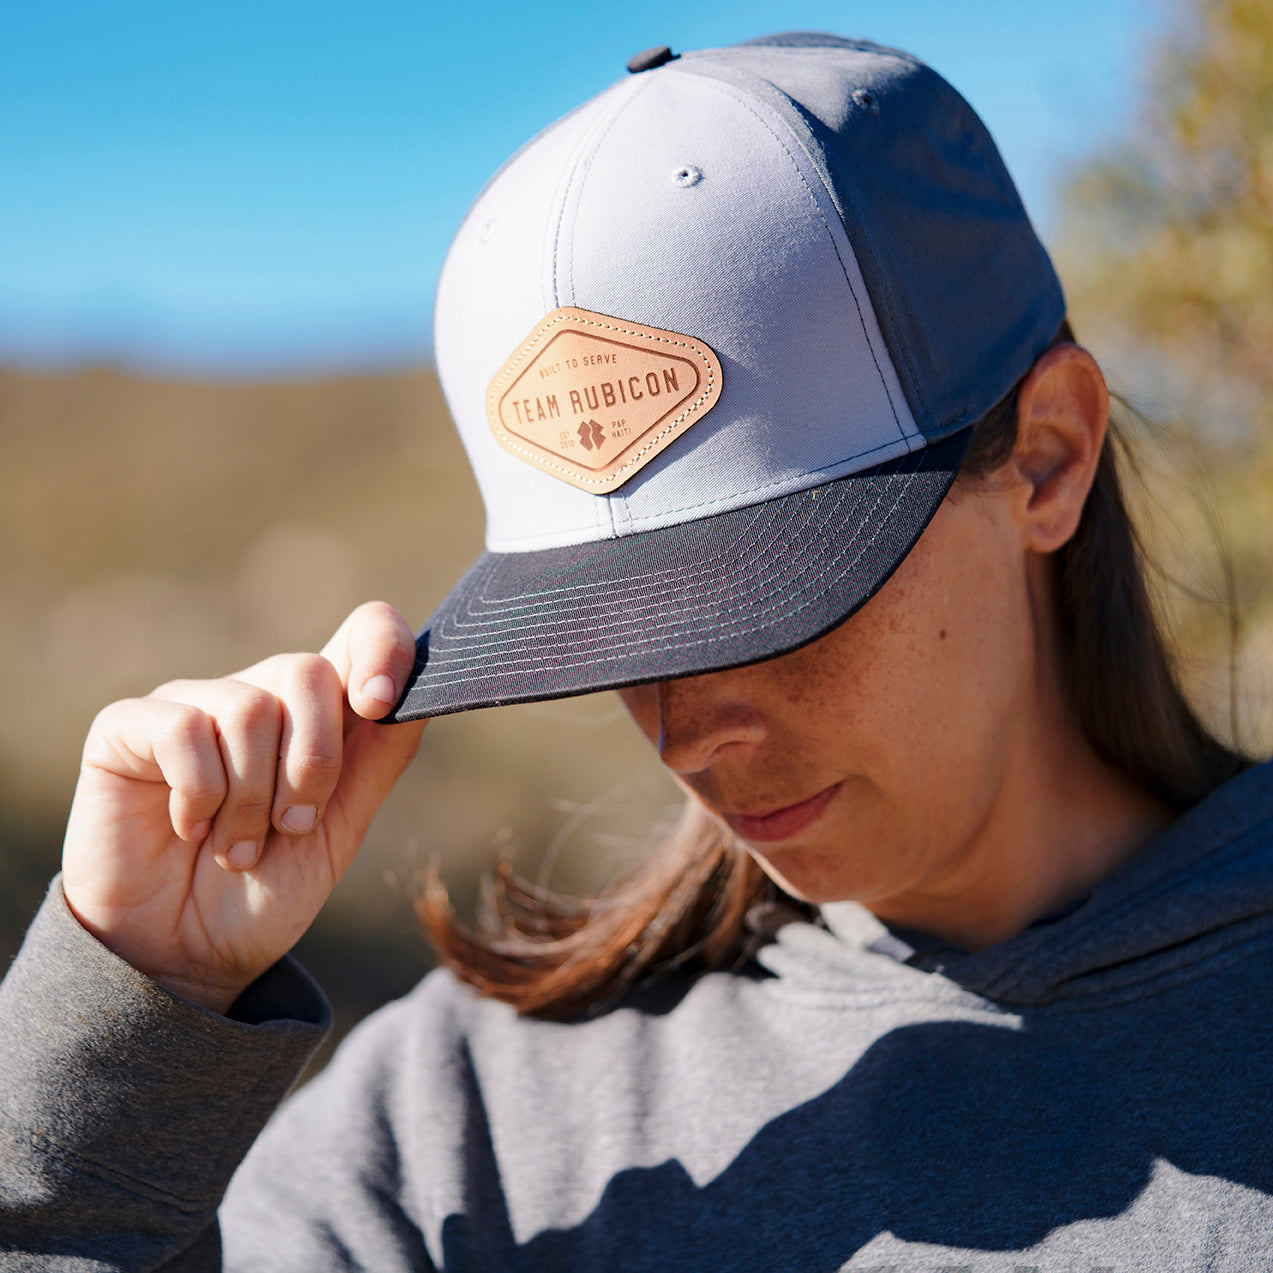 Team Rubicon Leather Patch Trucker Hat